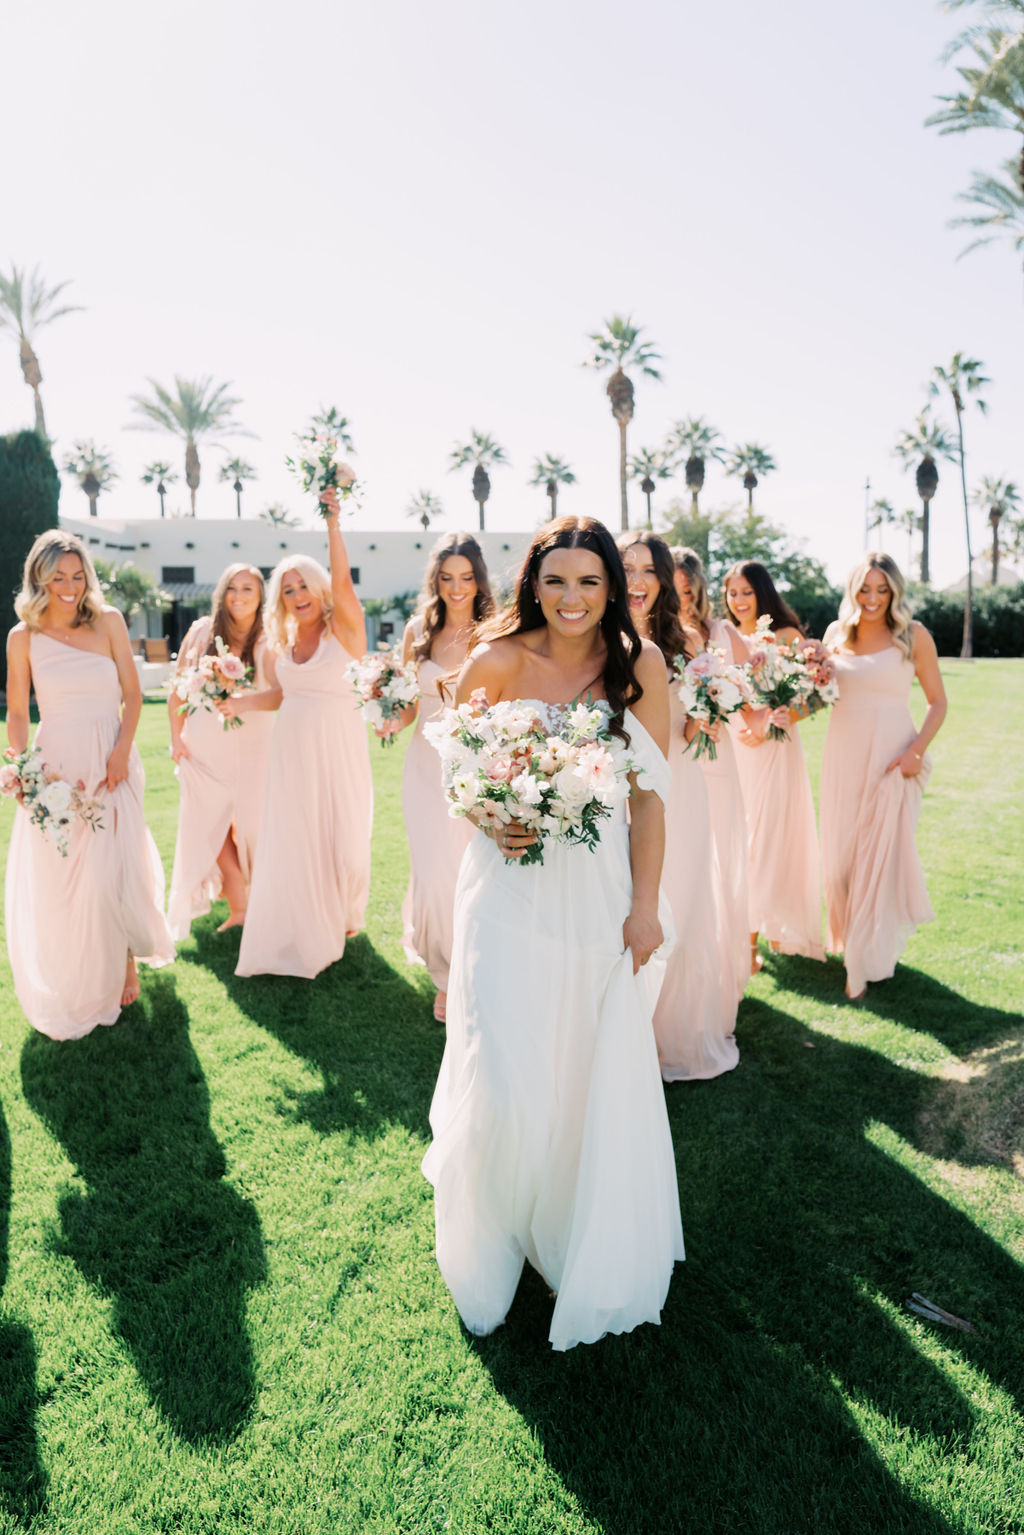 Bride walking in front of bridesmaids in blush dresses on grass field, all smiling.